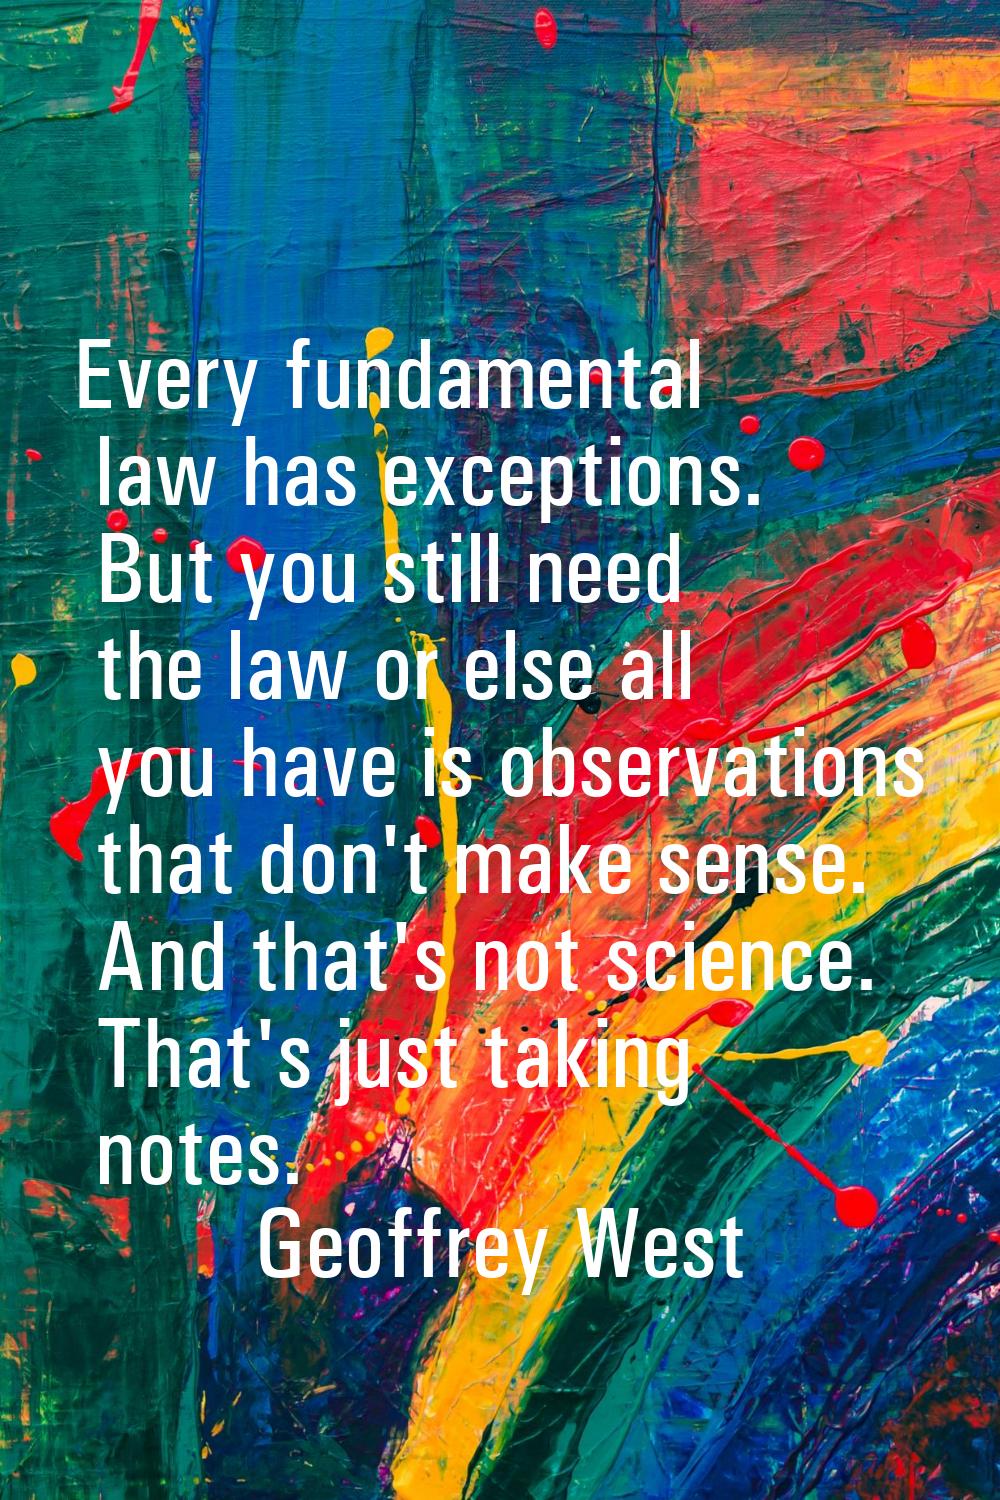 Every fundamental law has exceptions. But you still need the law or else all you have is observatio